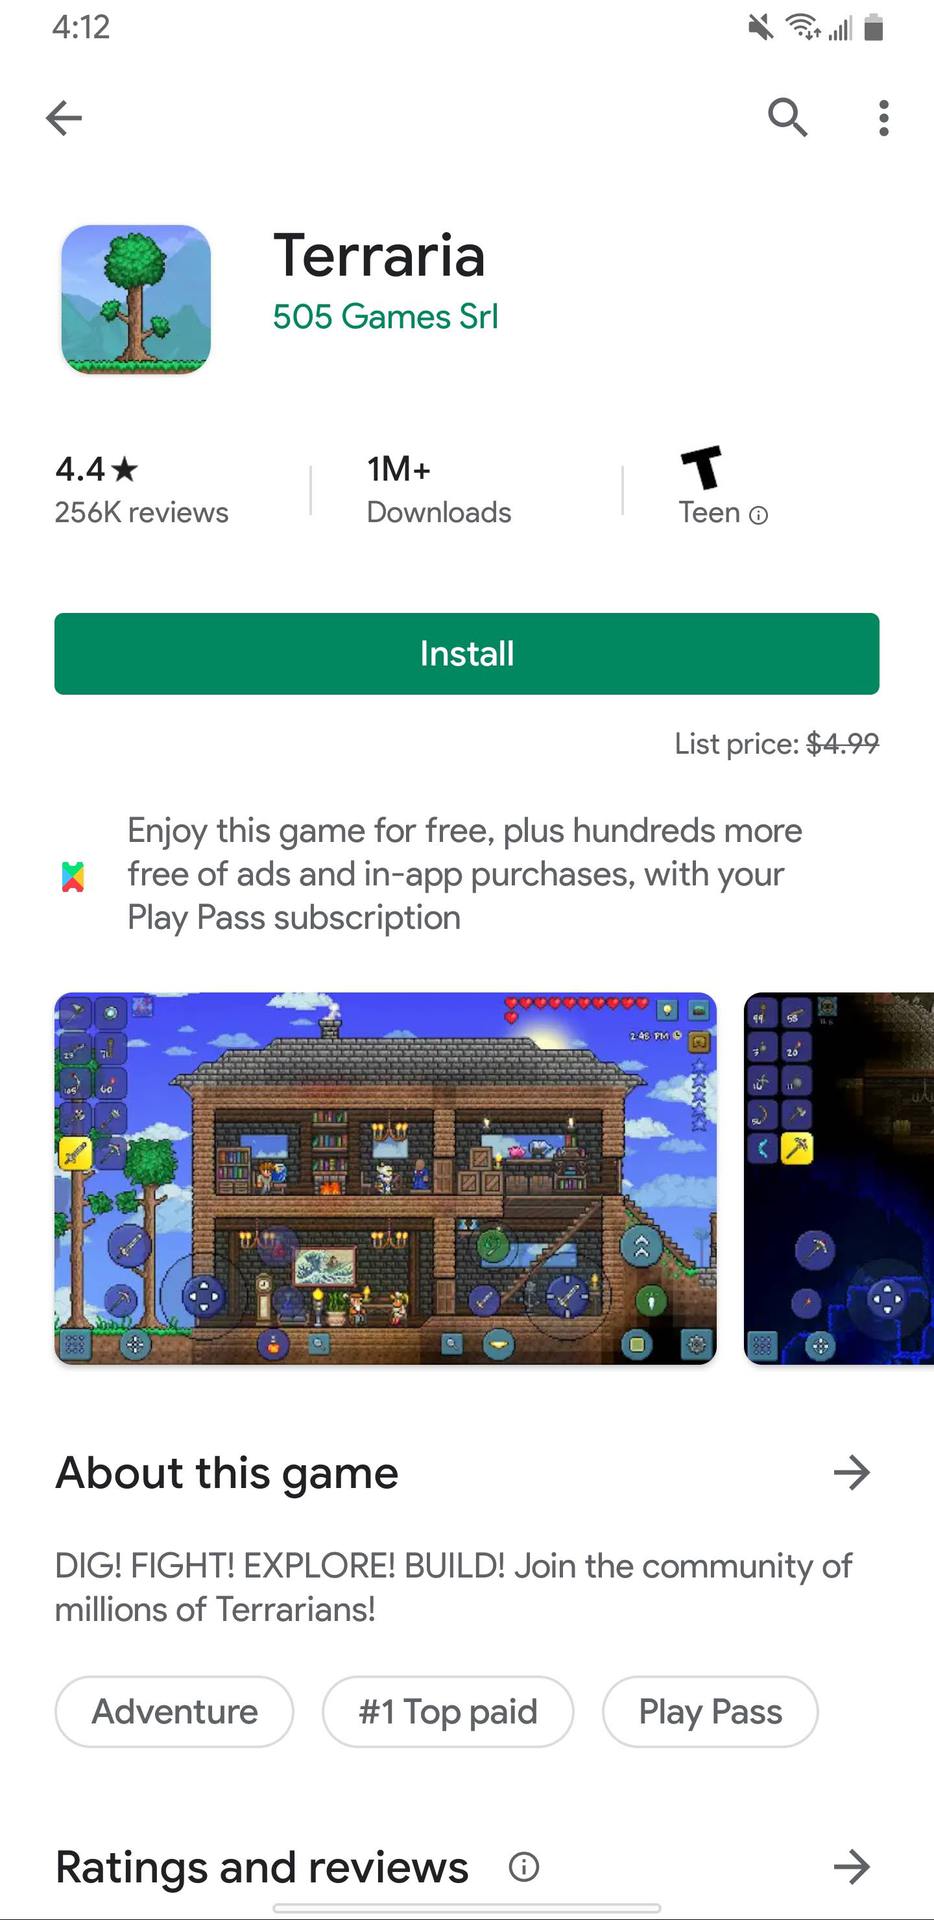 How To Get A Free Trial Subscription For Google Play Pass 